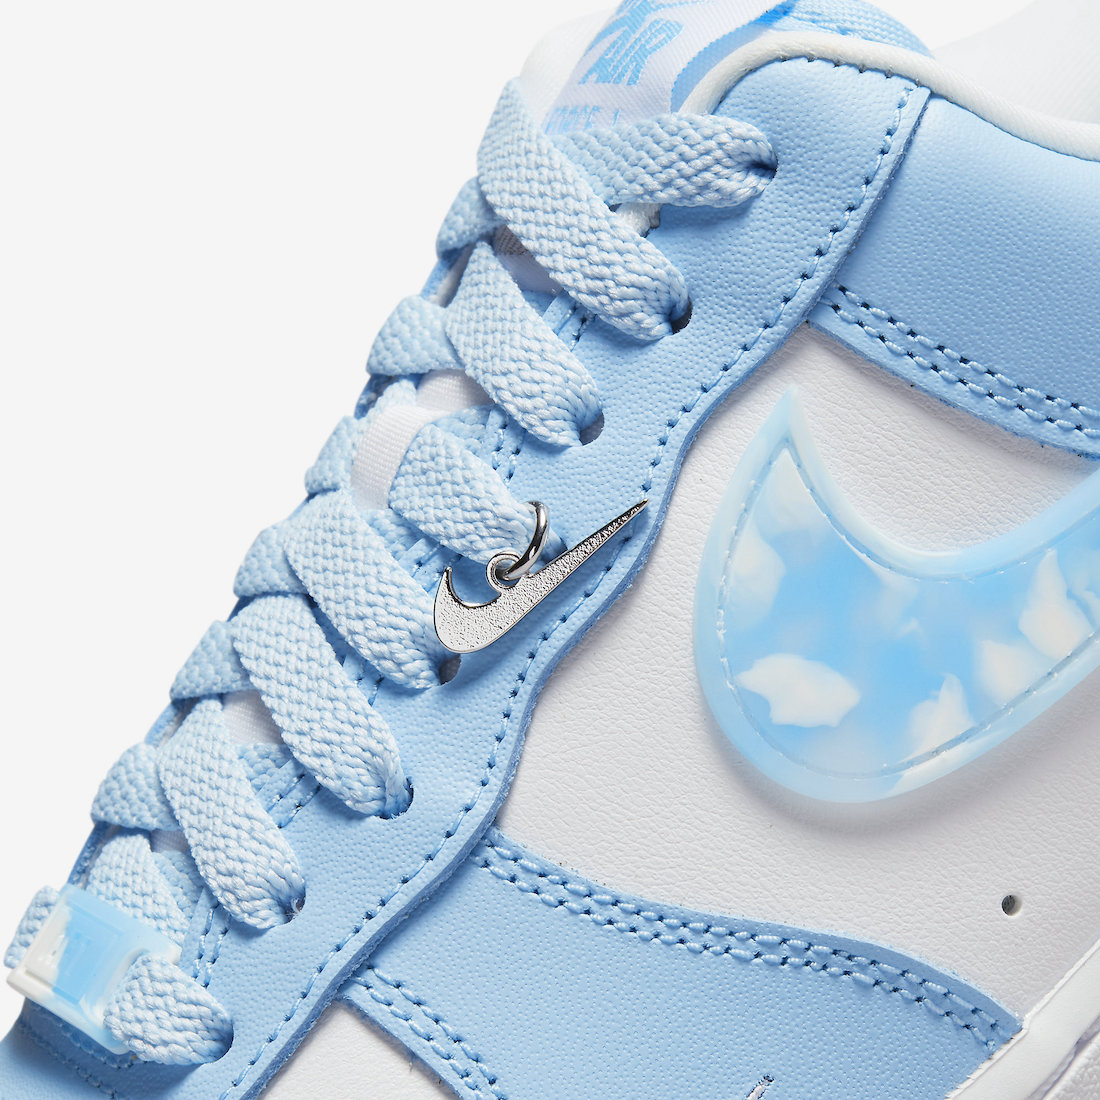 Nike Air Force 1 Low Nail Art DX2937-100 Release Date